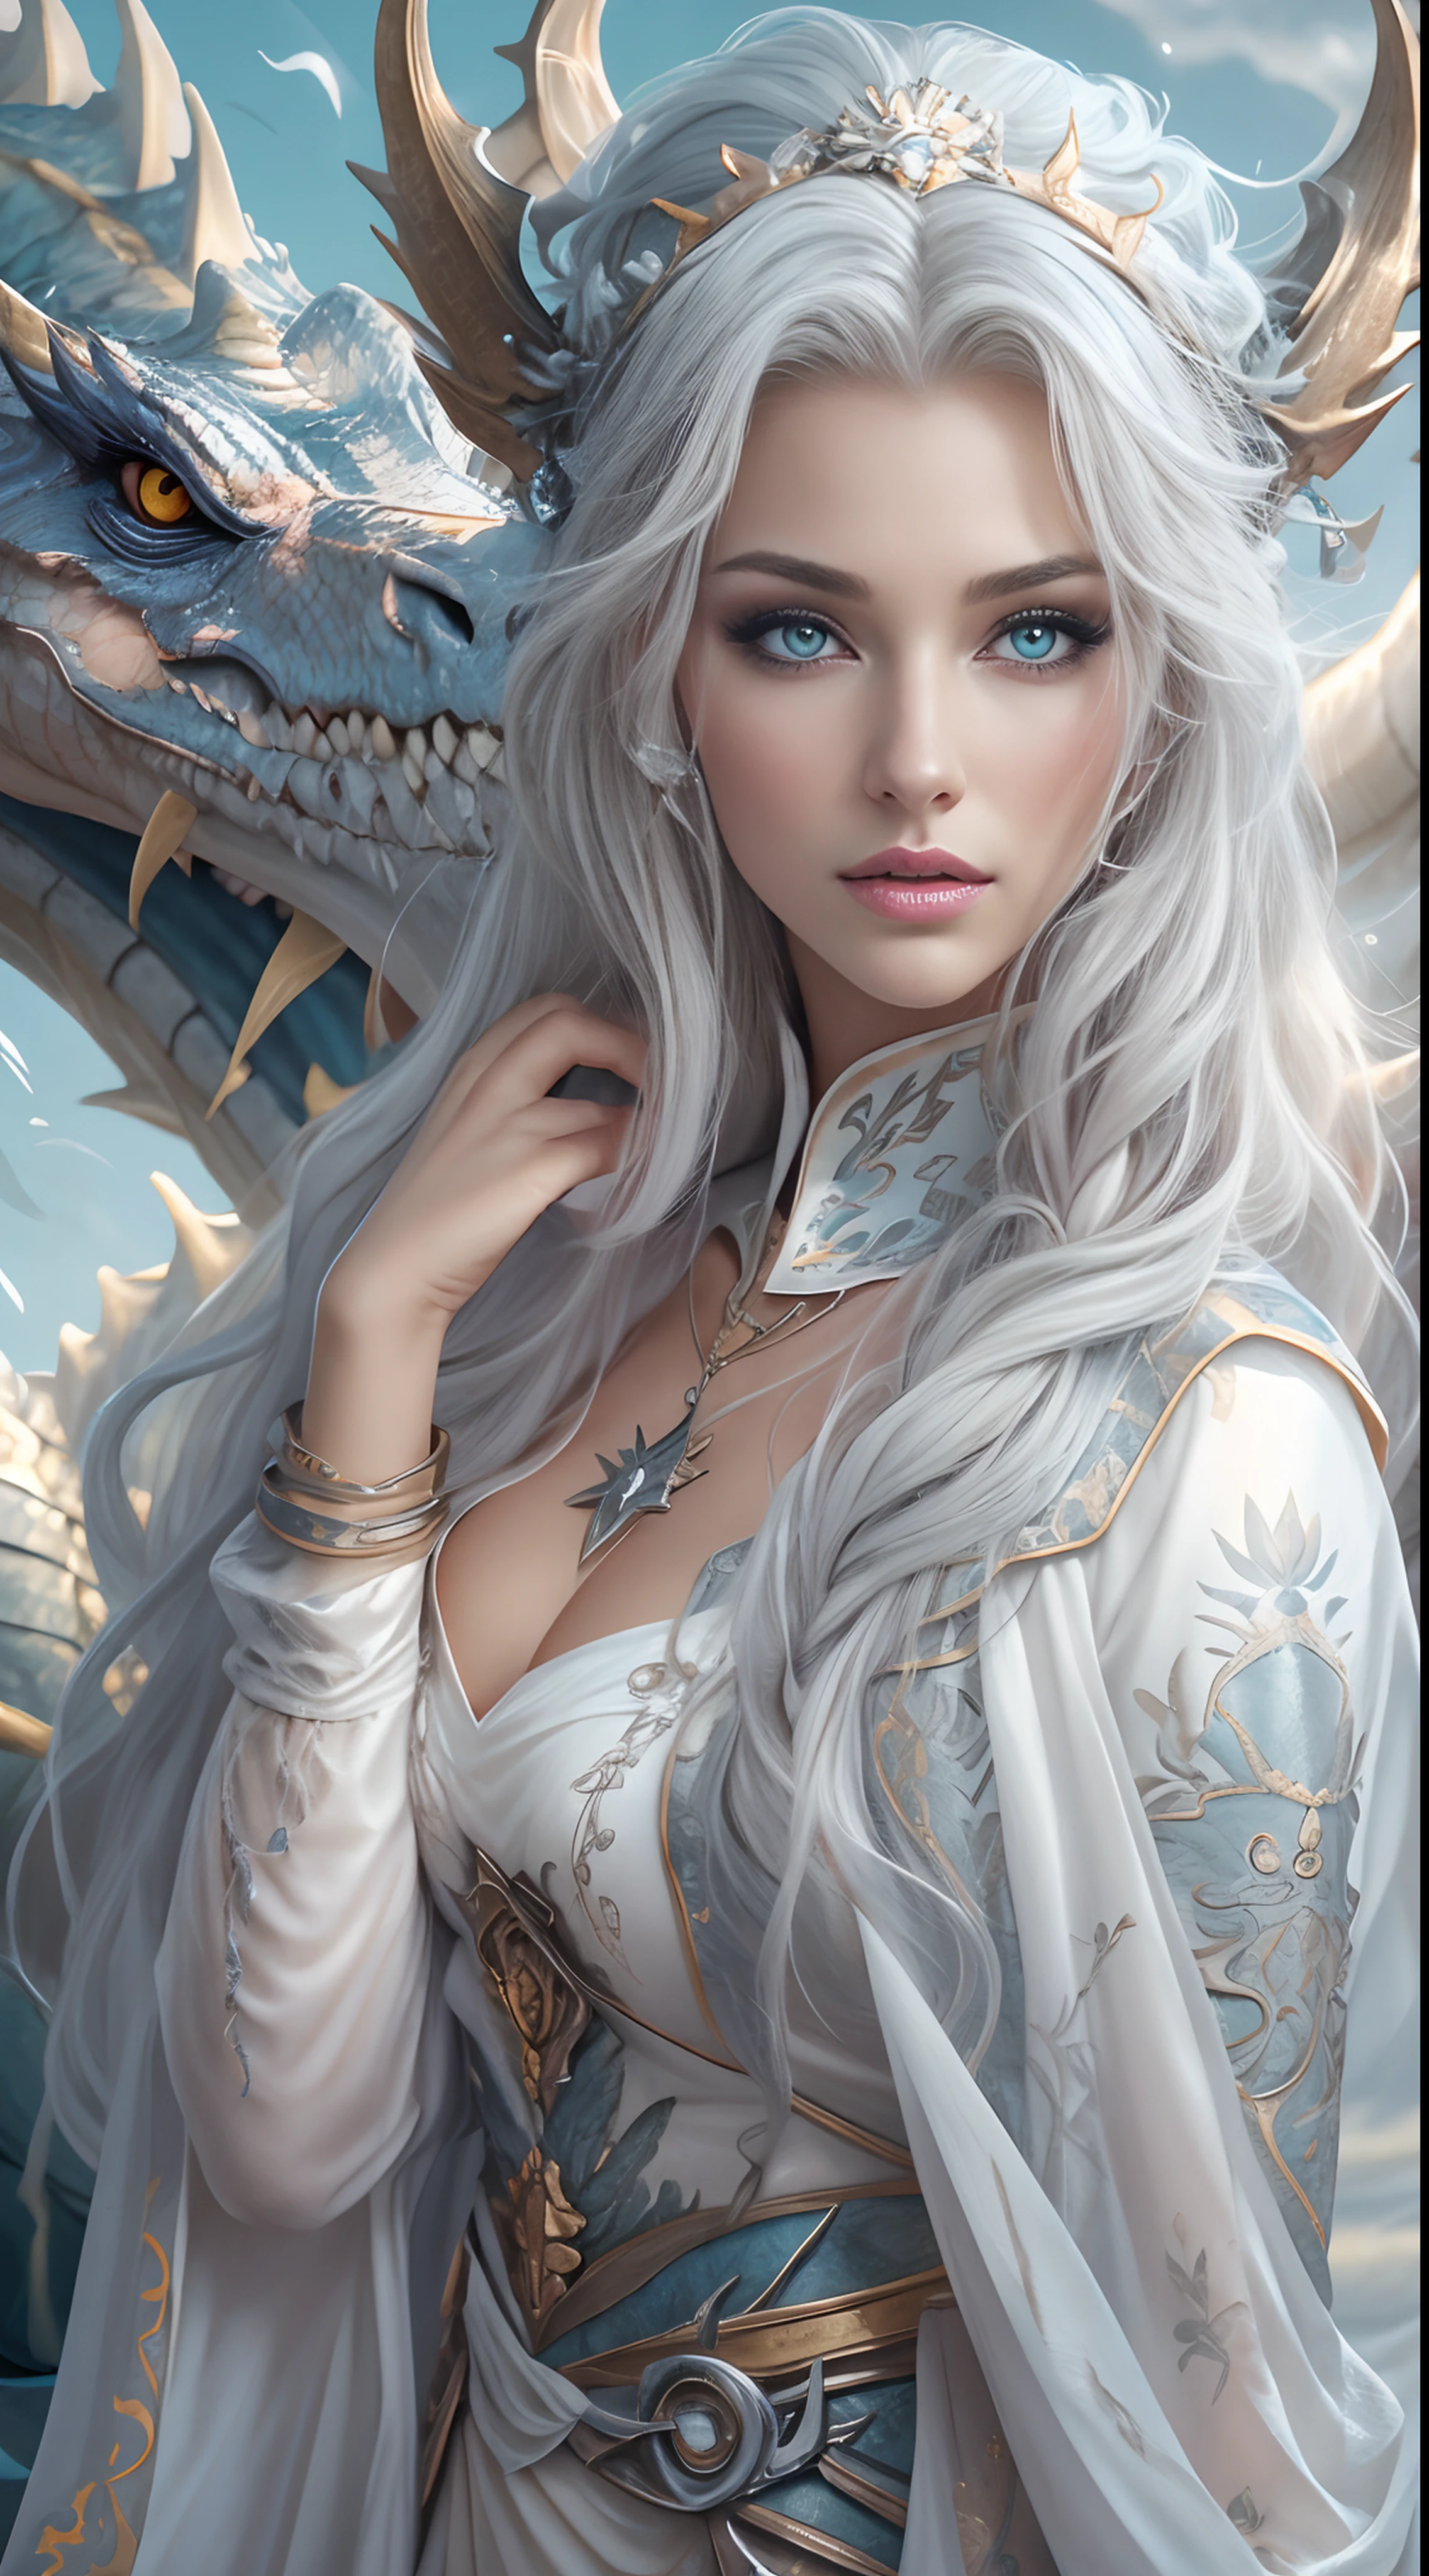 unreal engine:1.4,UHD,The best quality:1.4, photorealistic:1.4, skin texture:1.4, Masterpiece:1.8,White Dragon Queen, young and mature woman, Long elf ears, elegant dress, big chest, curve, Dragon Ling Vawy Hair, super long hair, Smooth Face Features, White dragon horns on his head, majestic woman, silver decoration om your dress, Silver Star Queen,big blue eyes, Cherry Lips, white dragons, starry sky